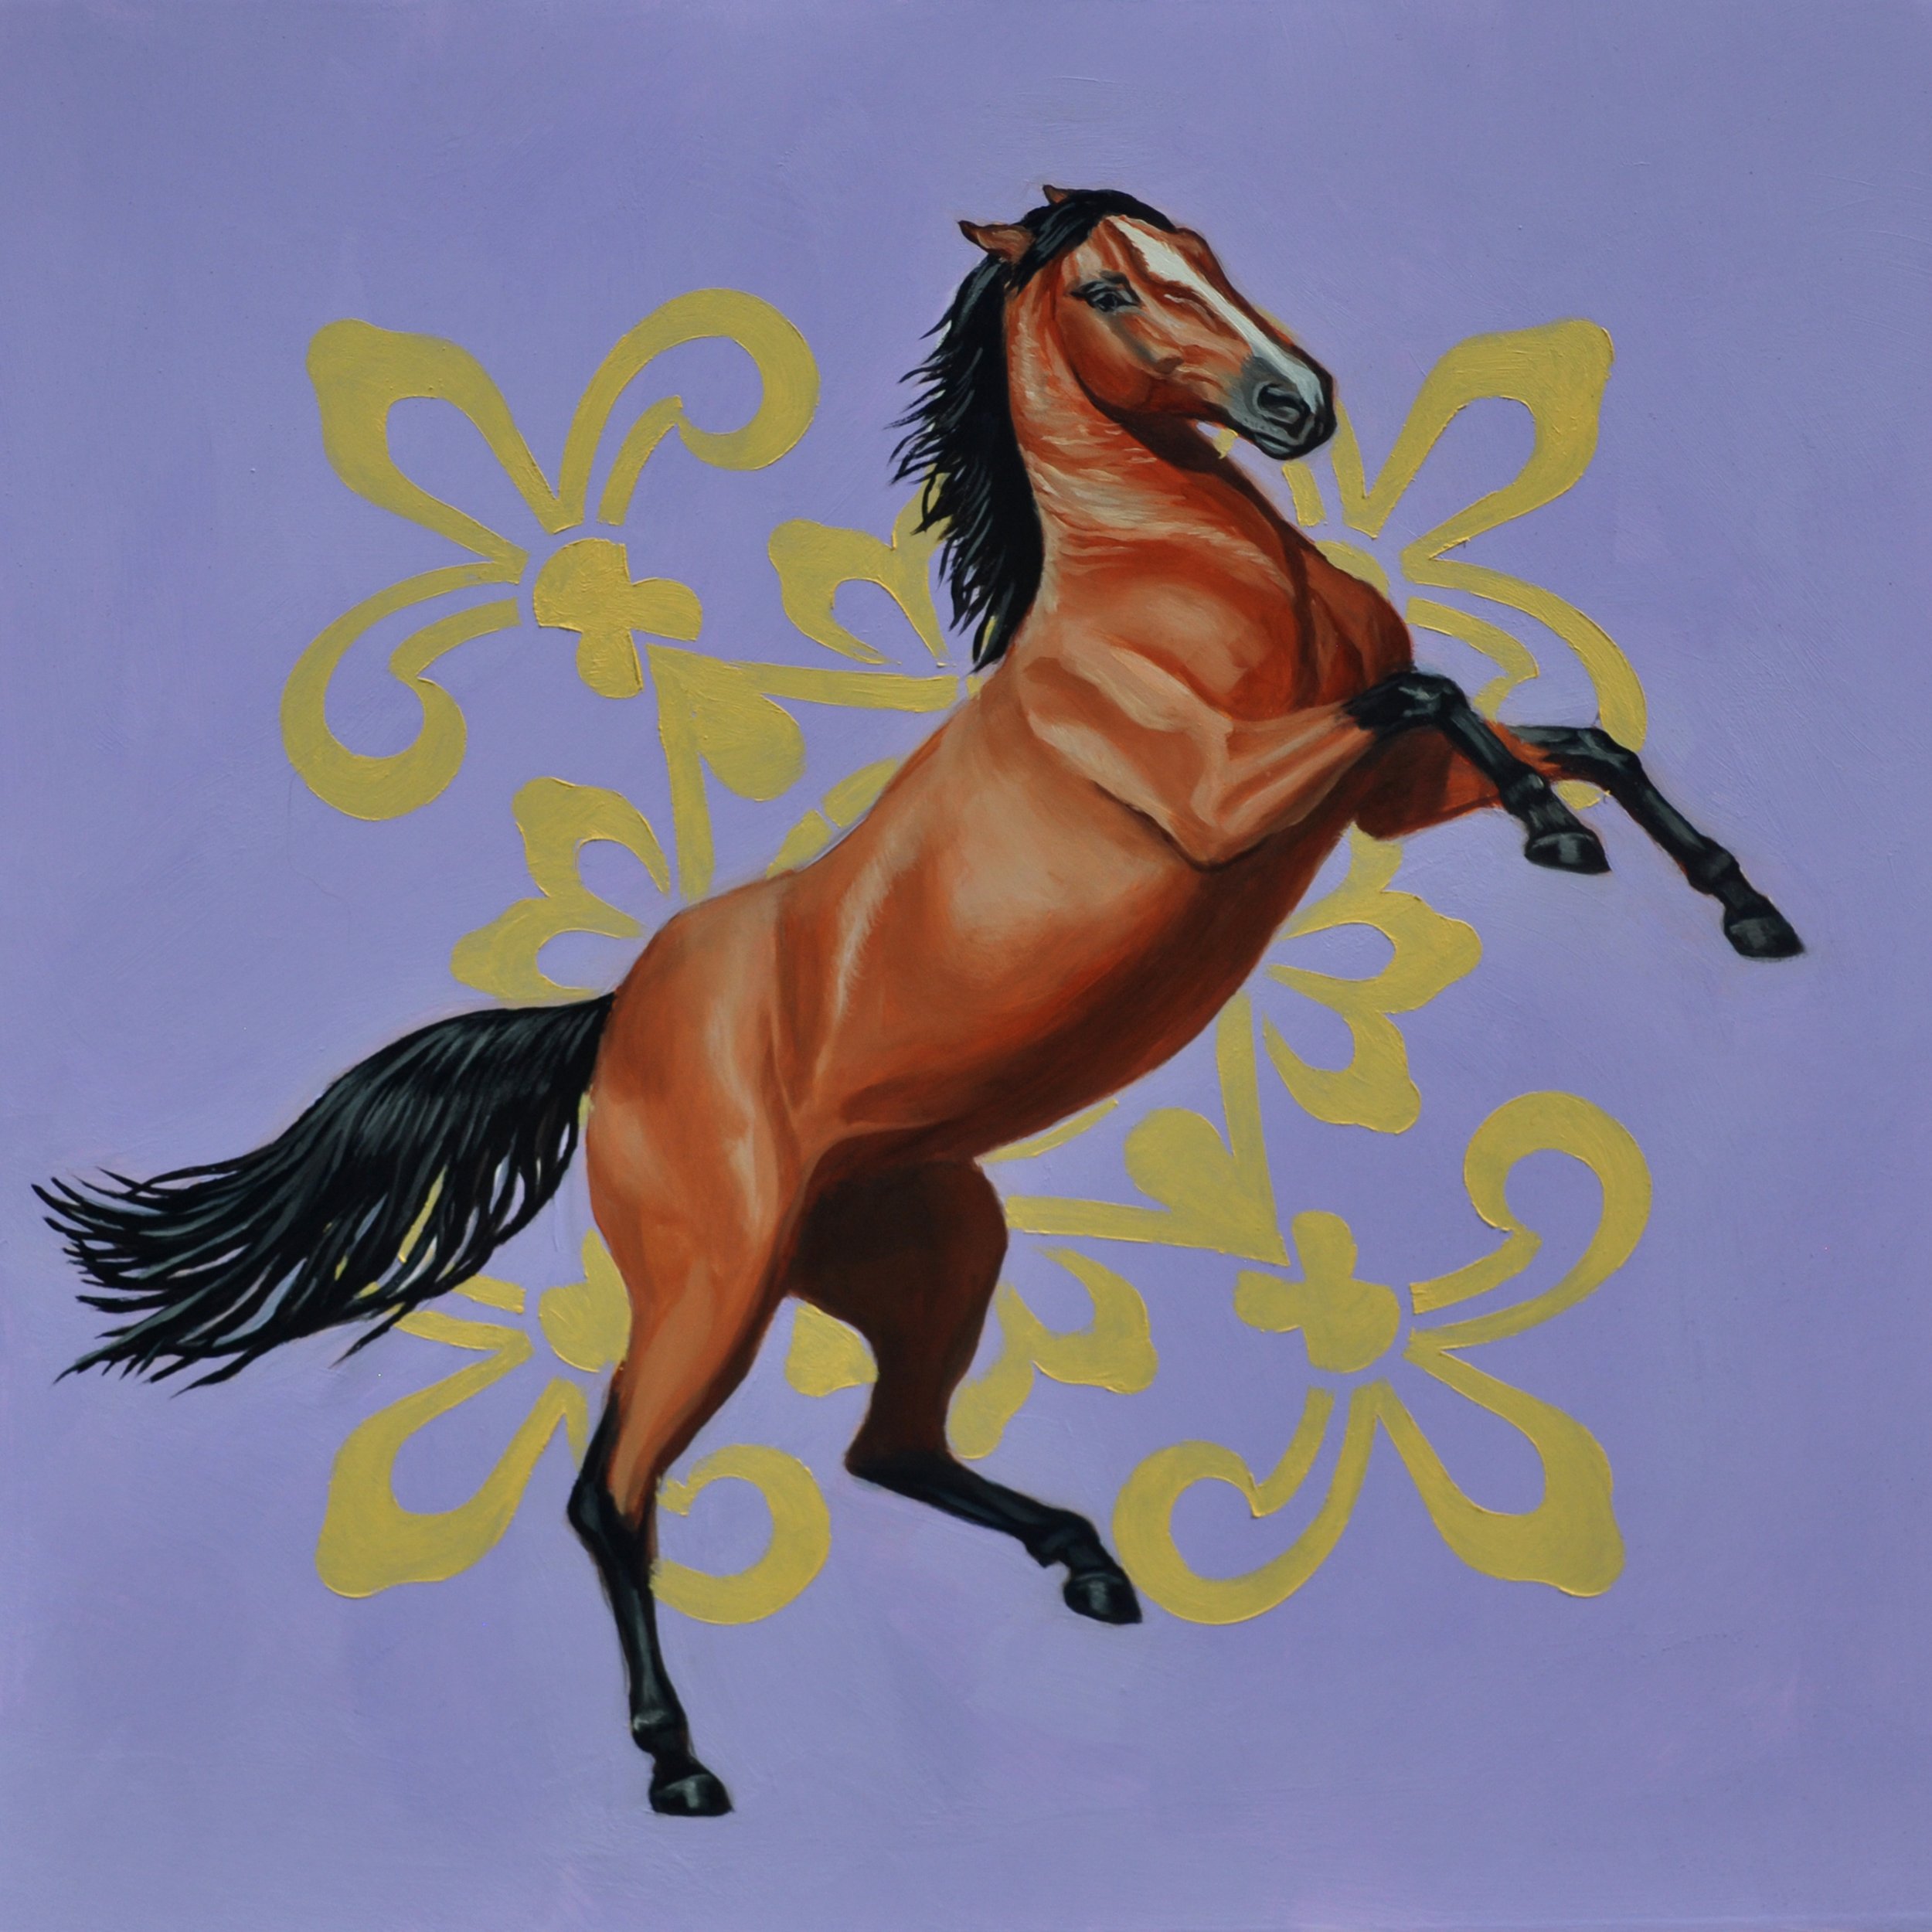 Leaping Horse on a Purple Background